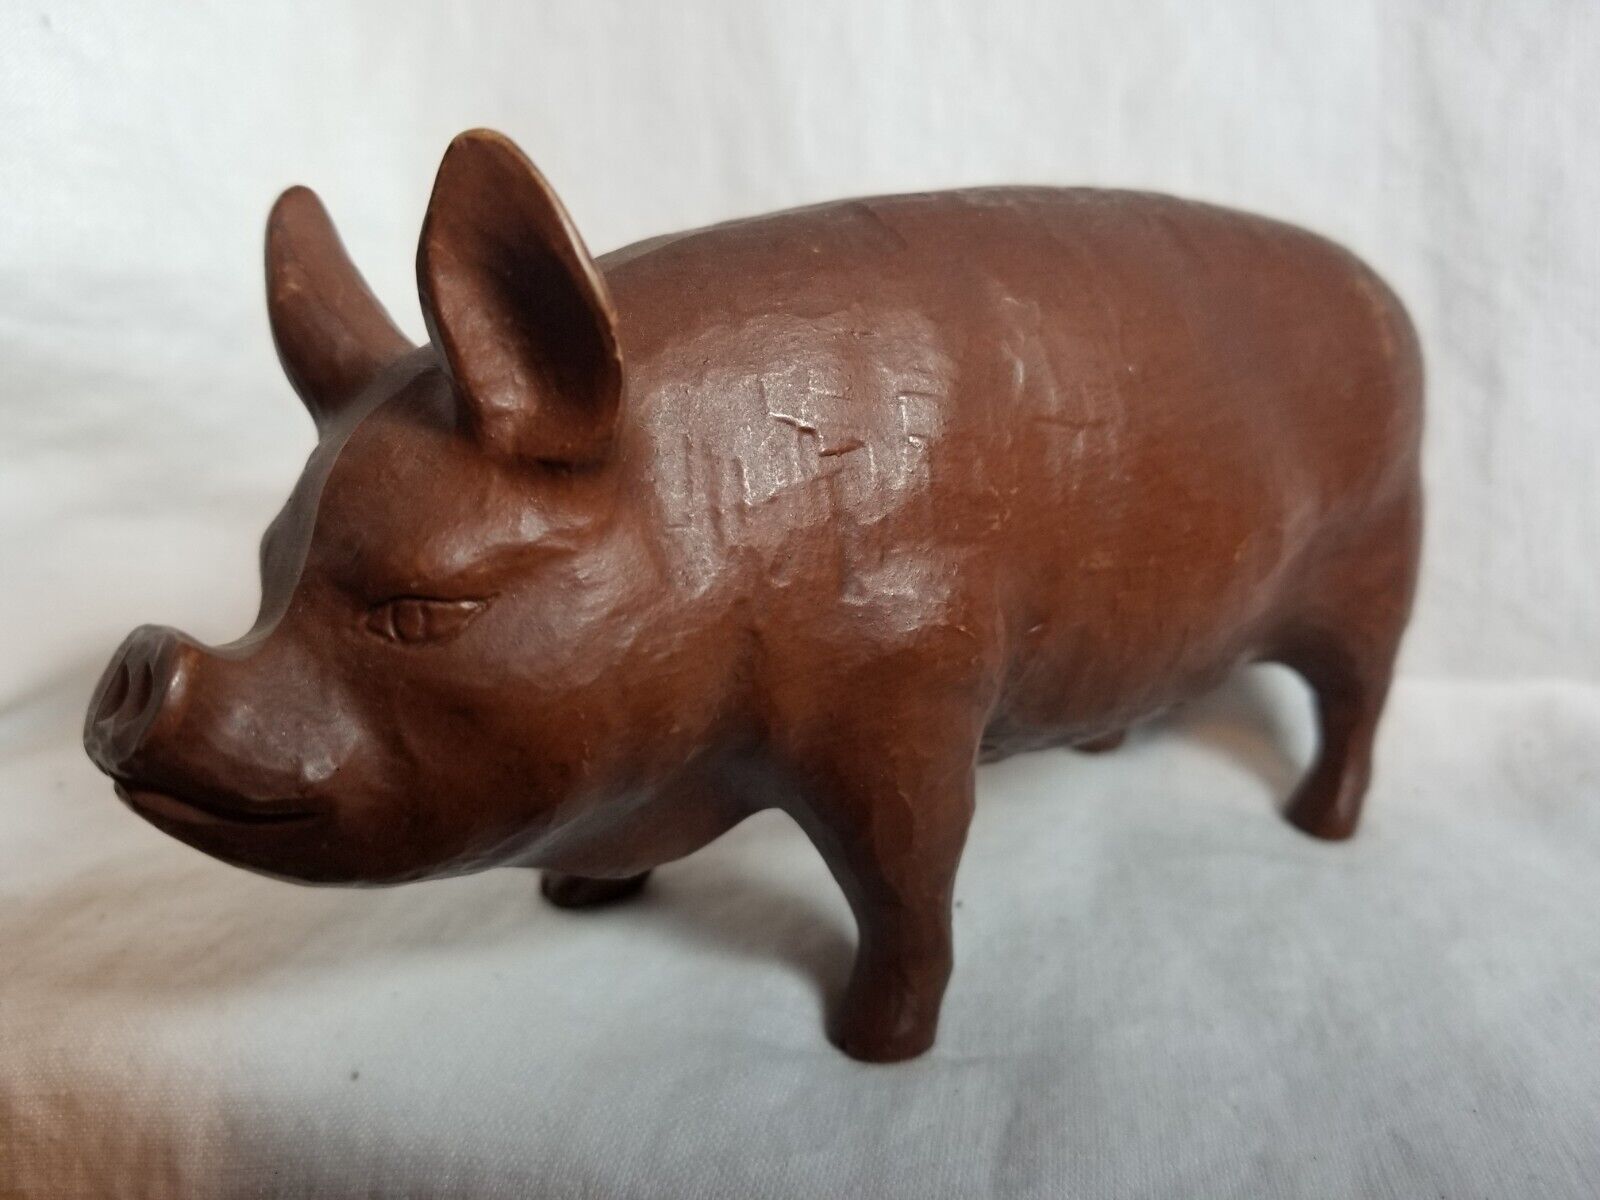 Carved Solid Wood Pig Figurine Paperweight Decor Piece 6.25